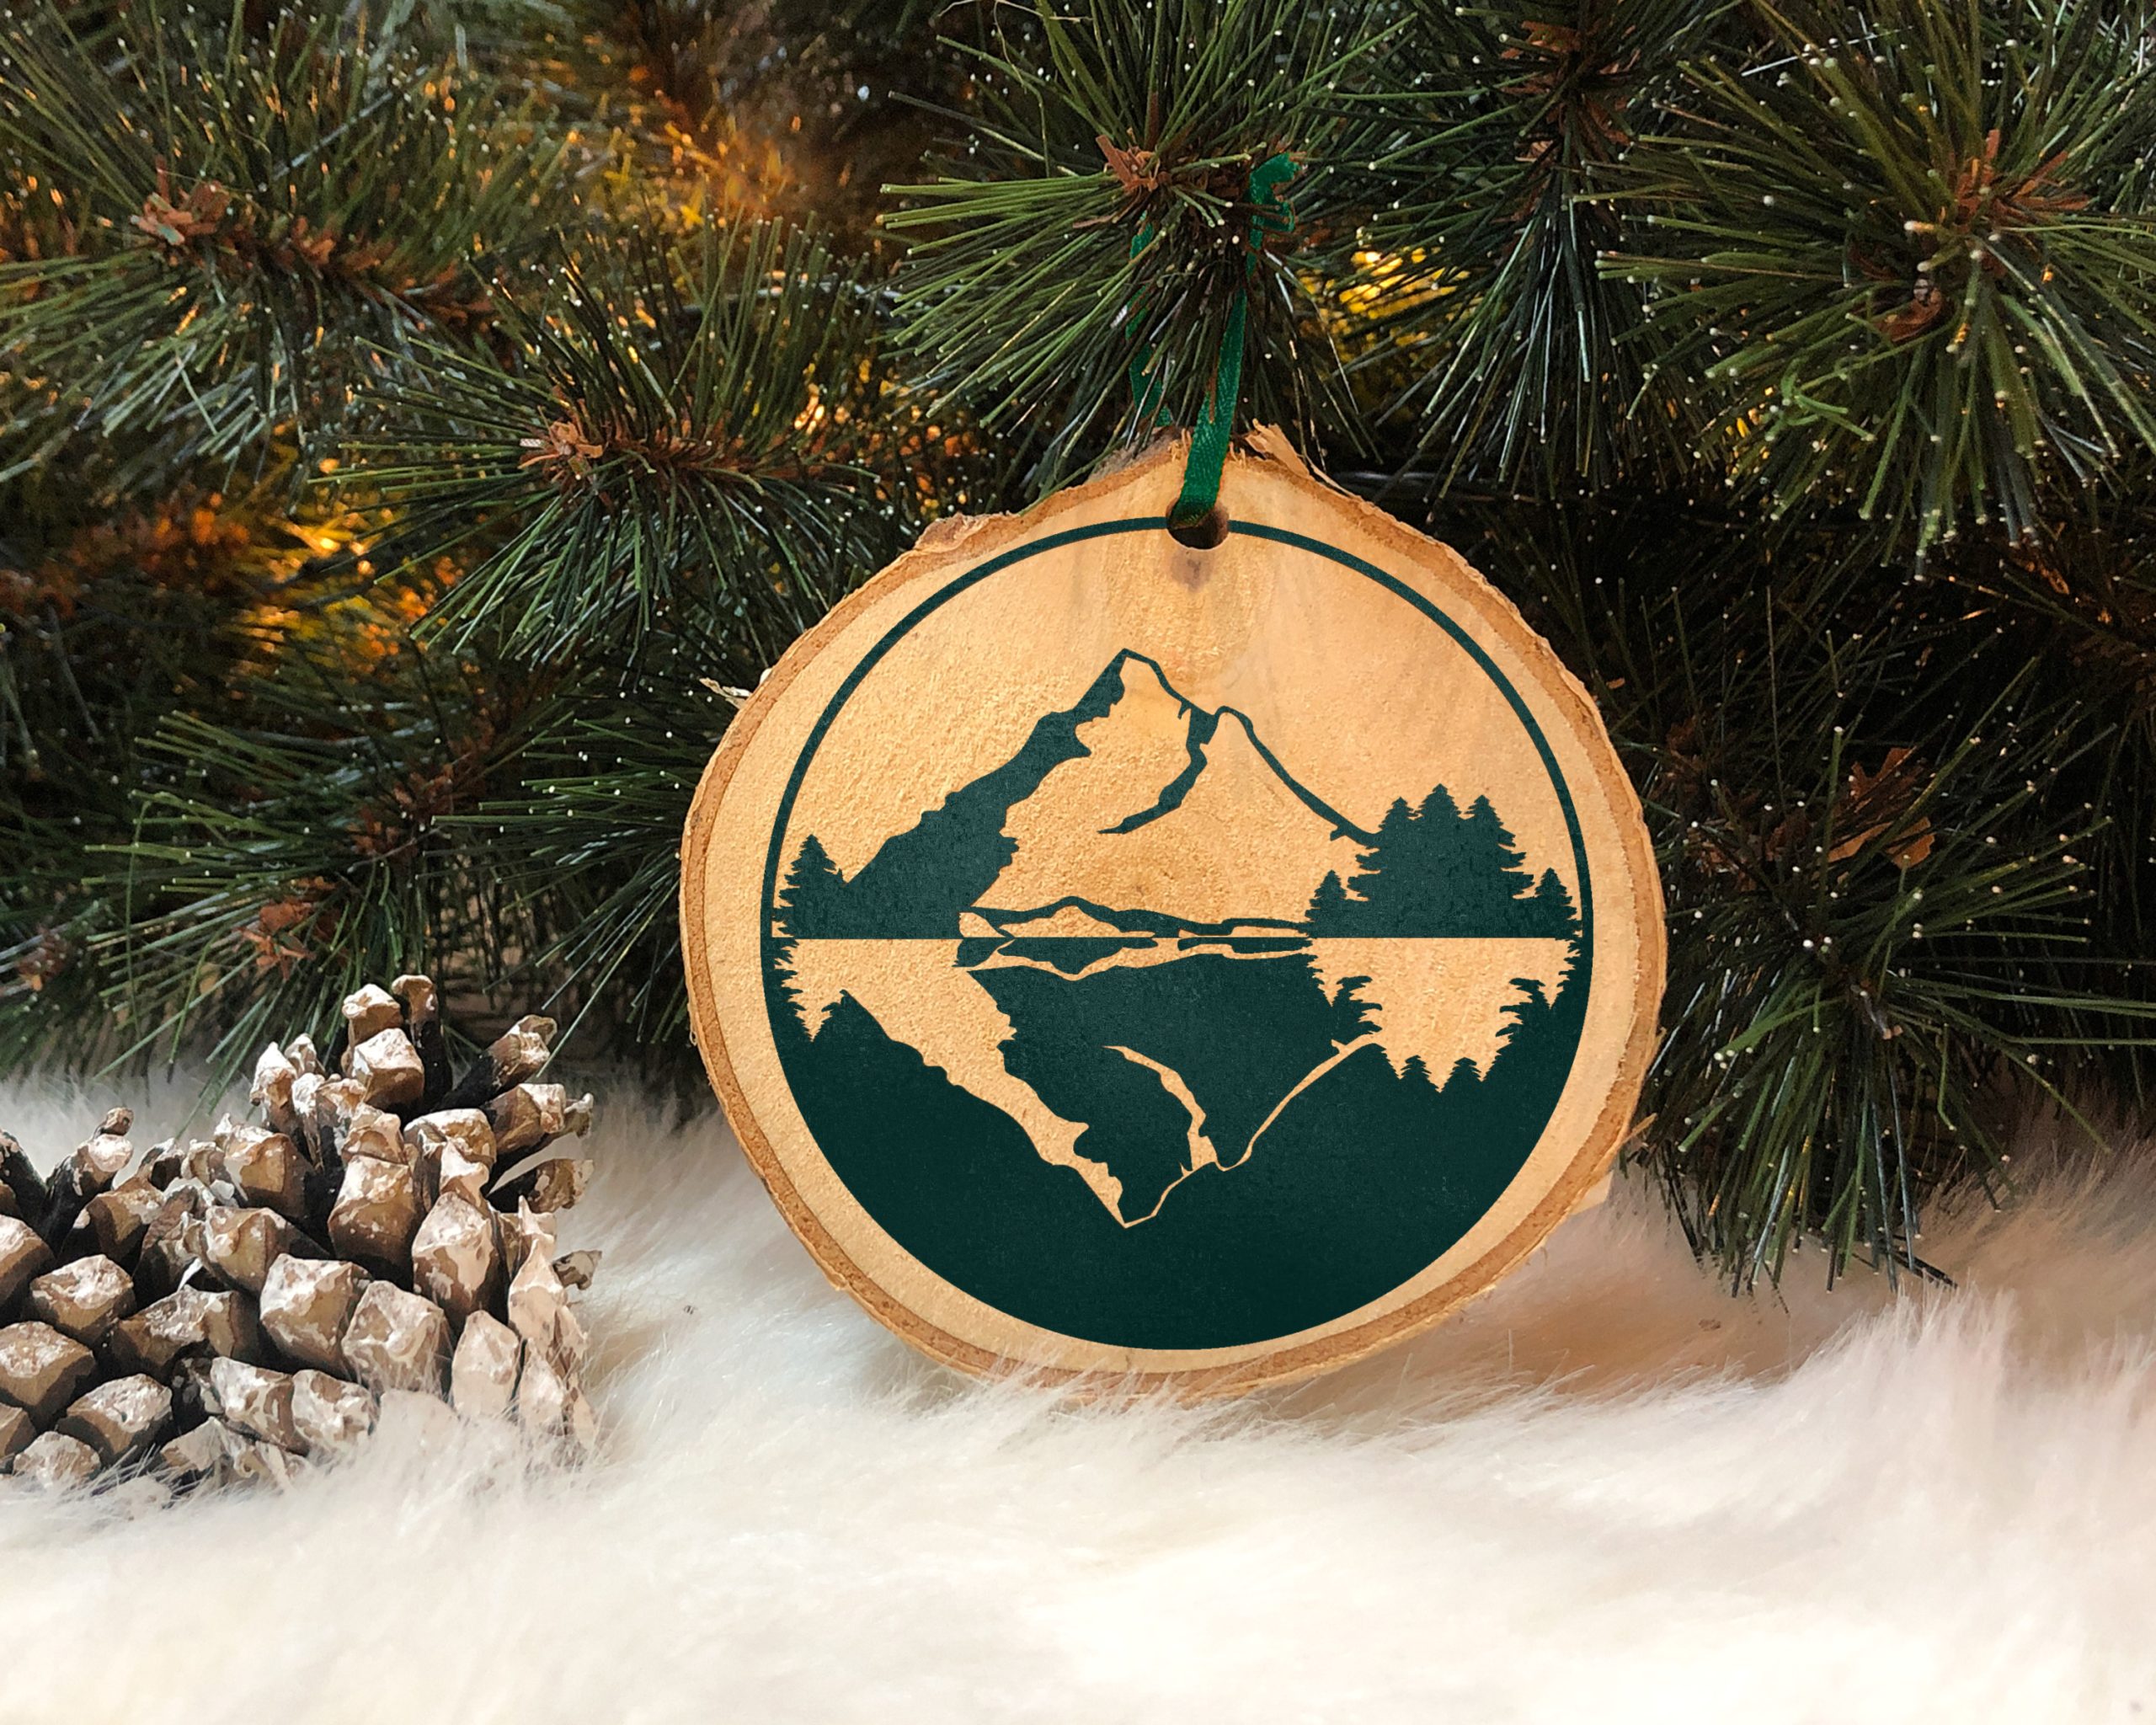 wood slice ornament decorated with foil vinyl mountains